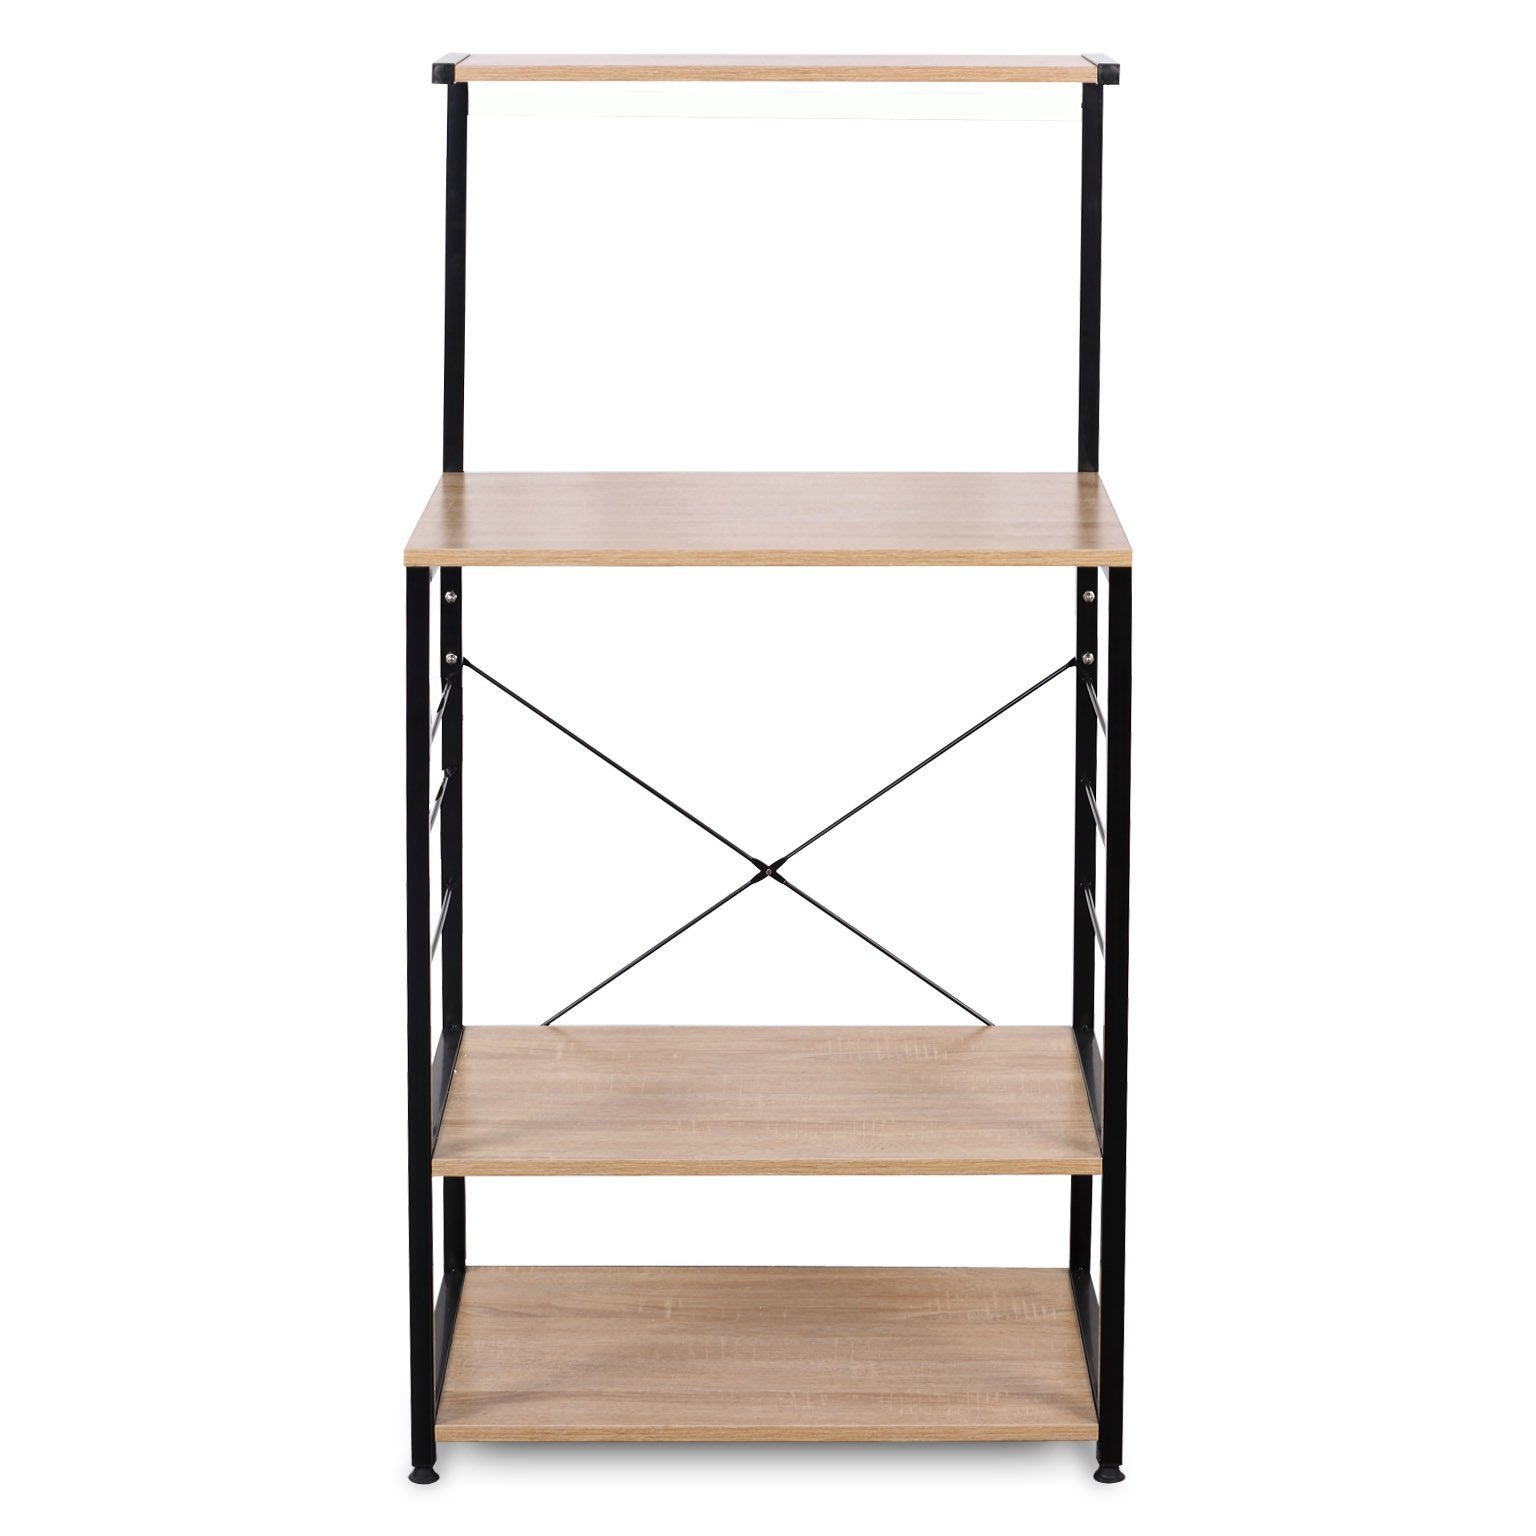 New woltu 4 tiers shelf kitchen storage display rack wooden and metal standing shelving unit for home bathroom use with 4 hooks